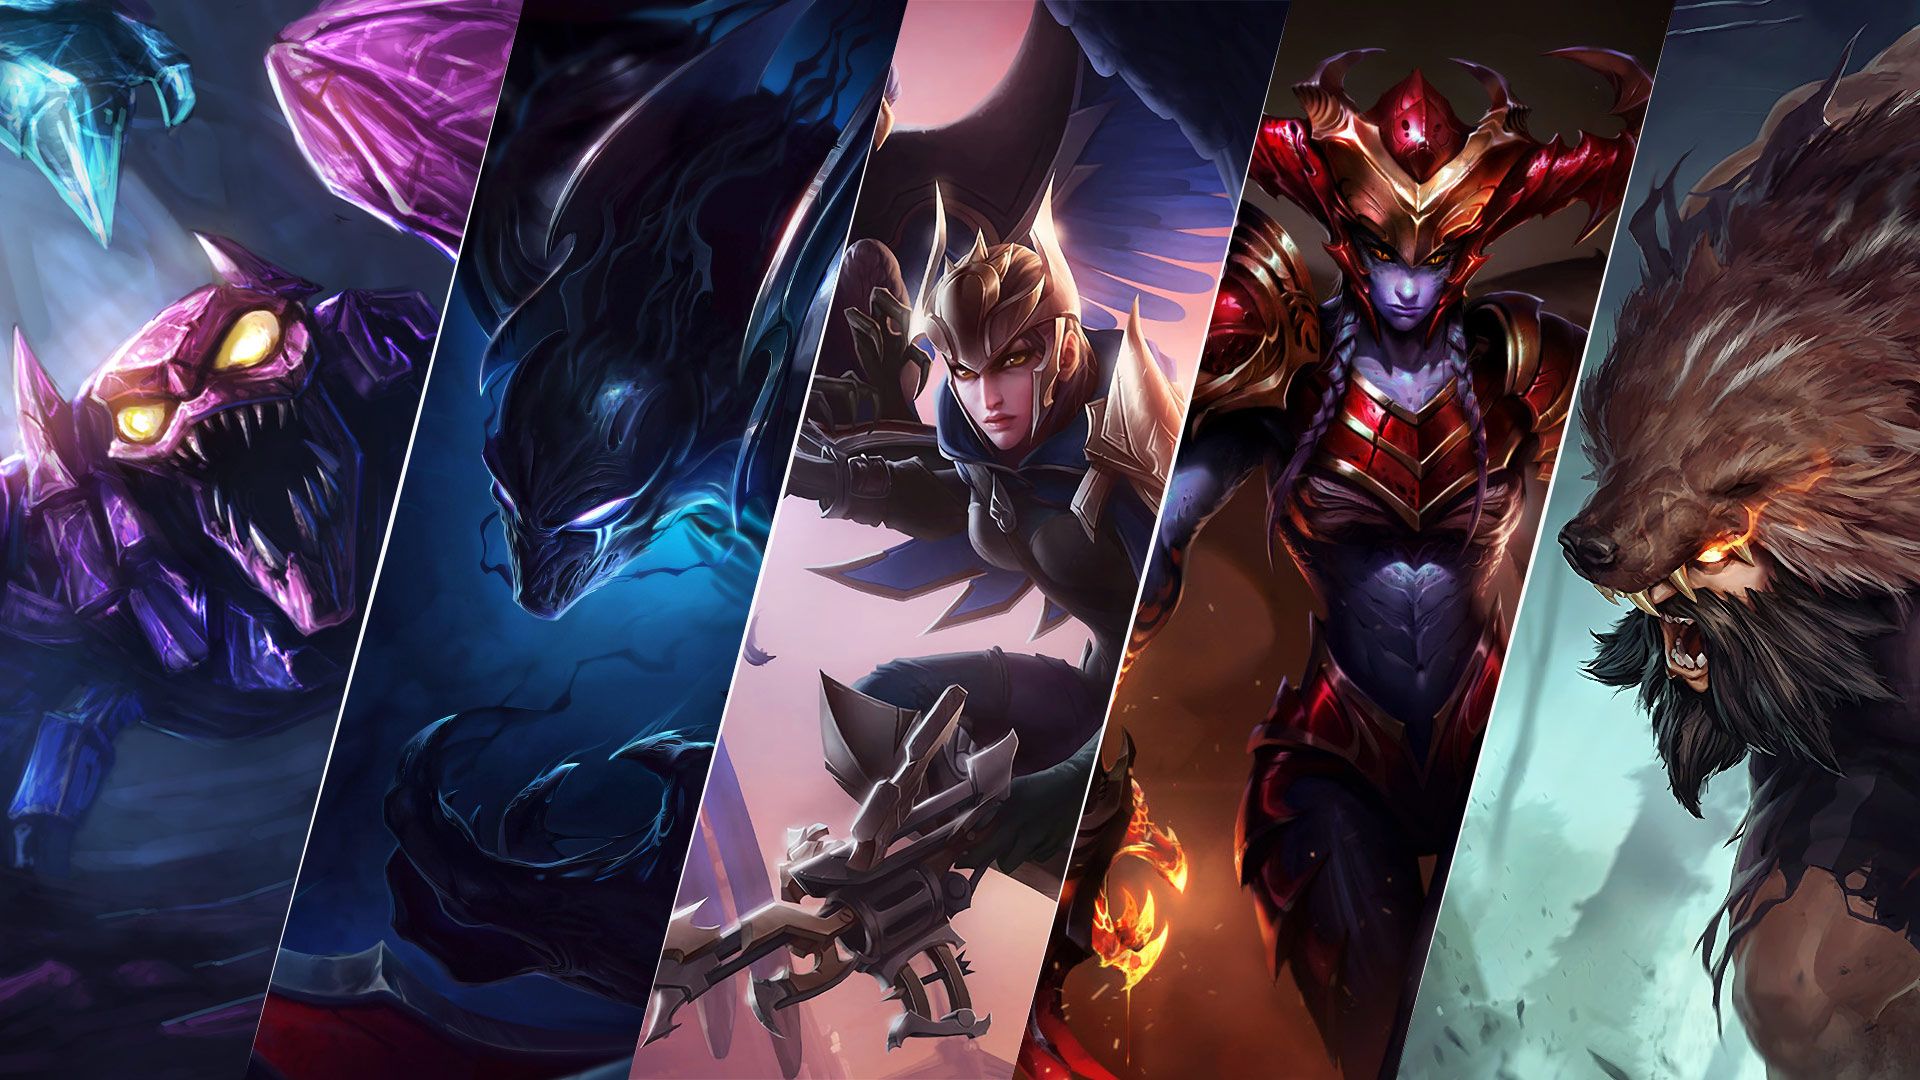 Learn How to Choose a Champion in League of Legends to Master to Help You Win More Games